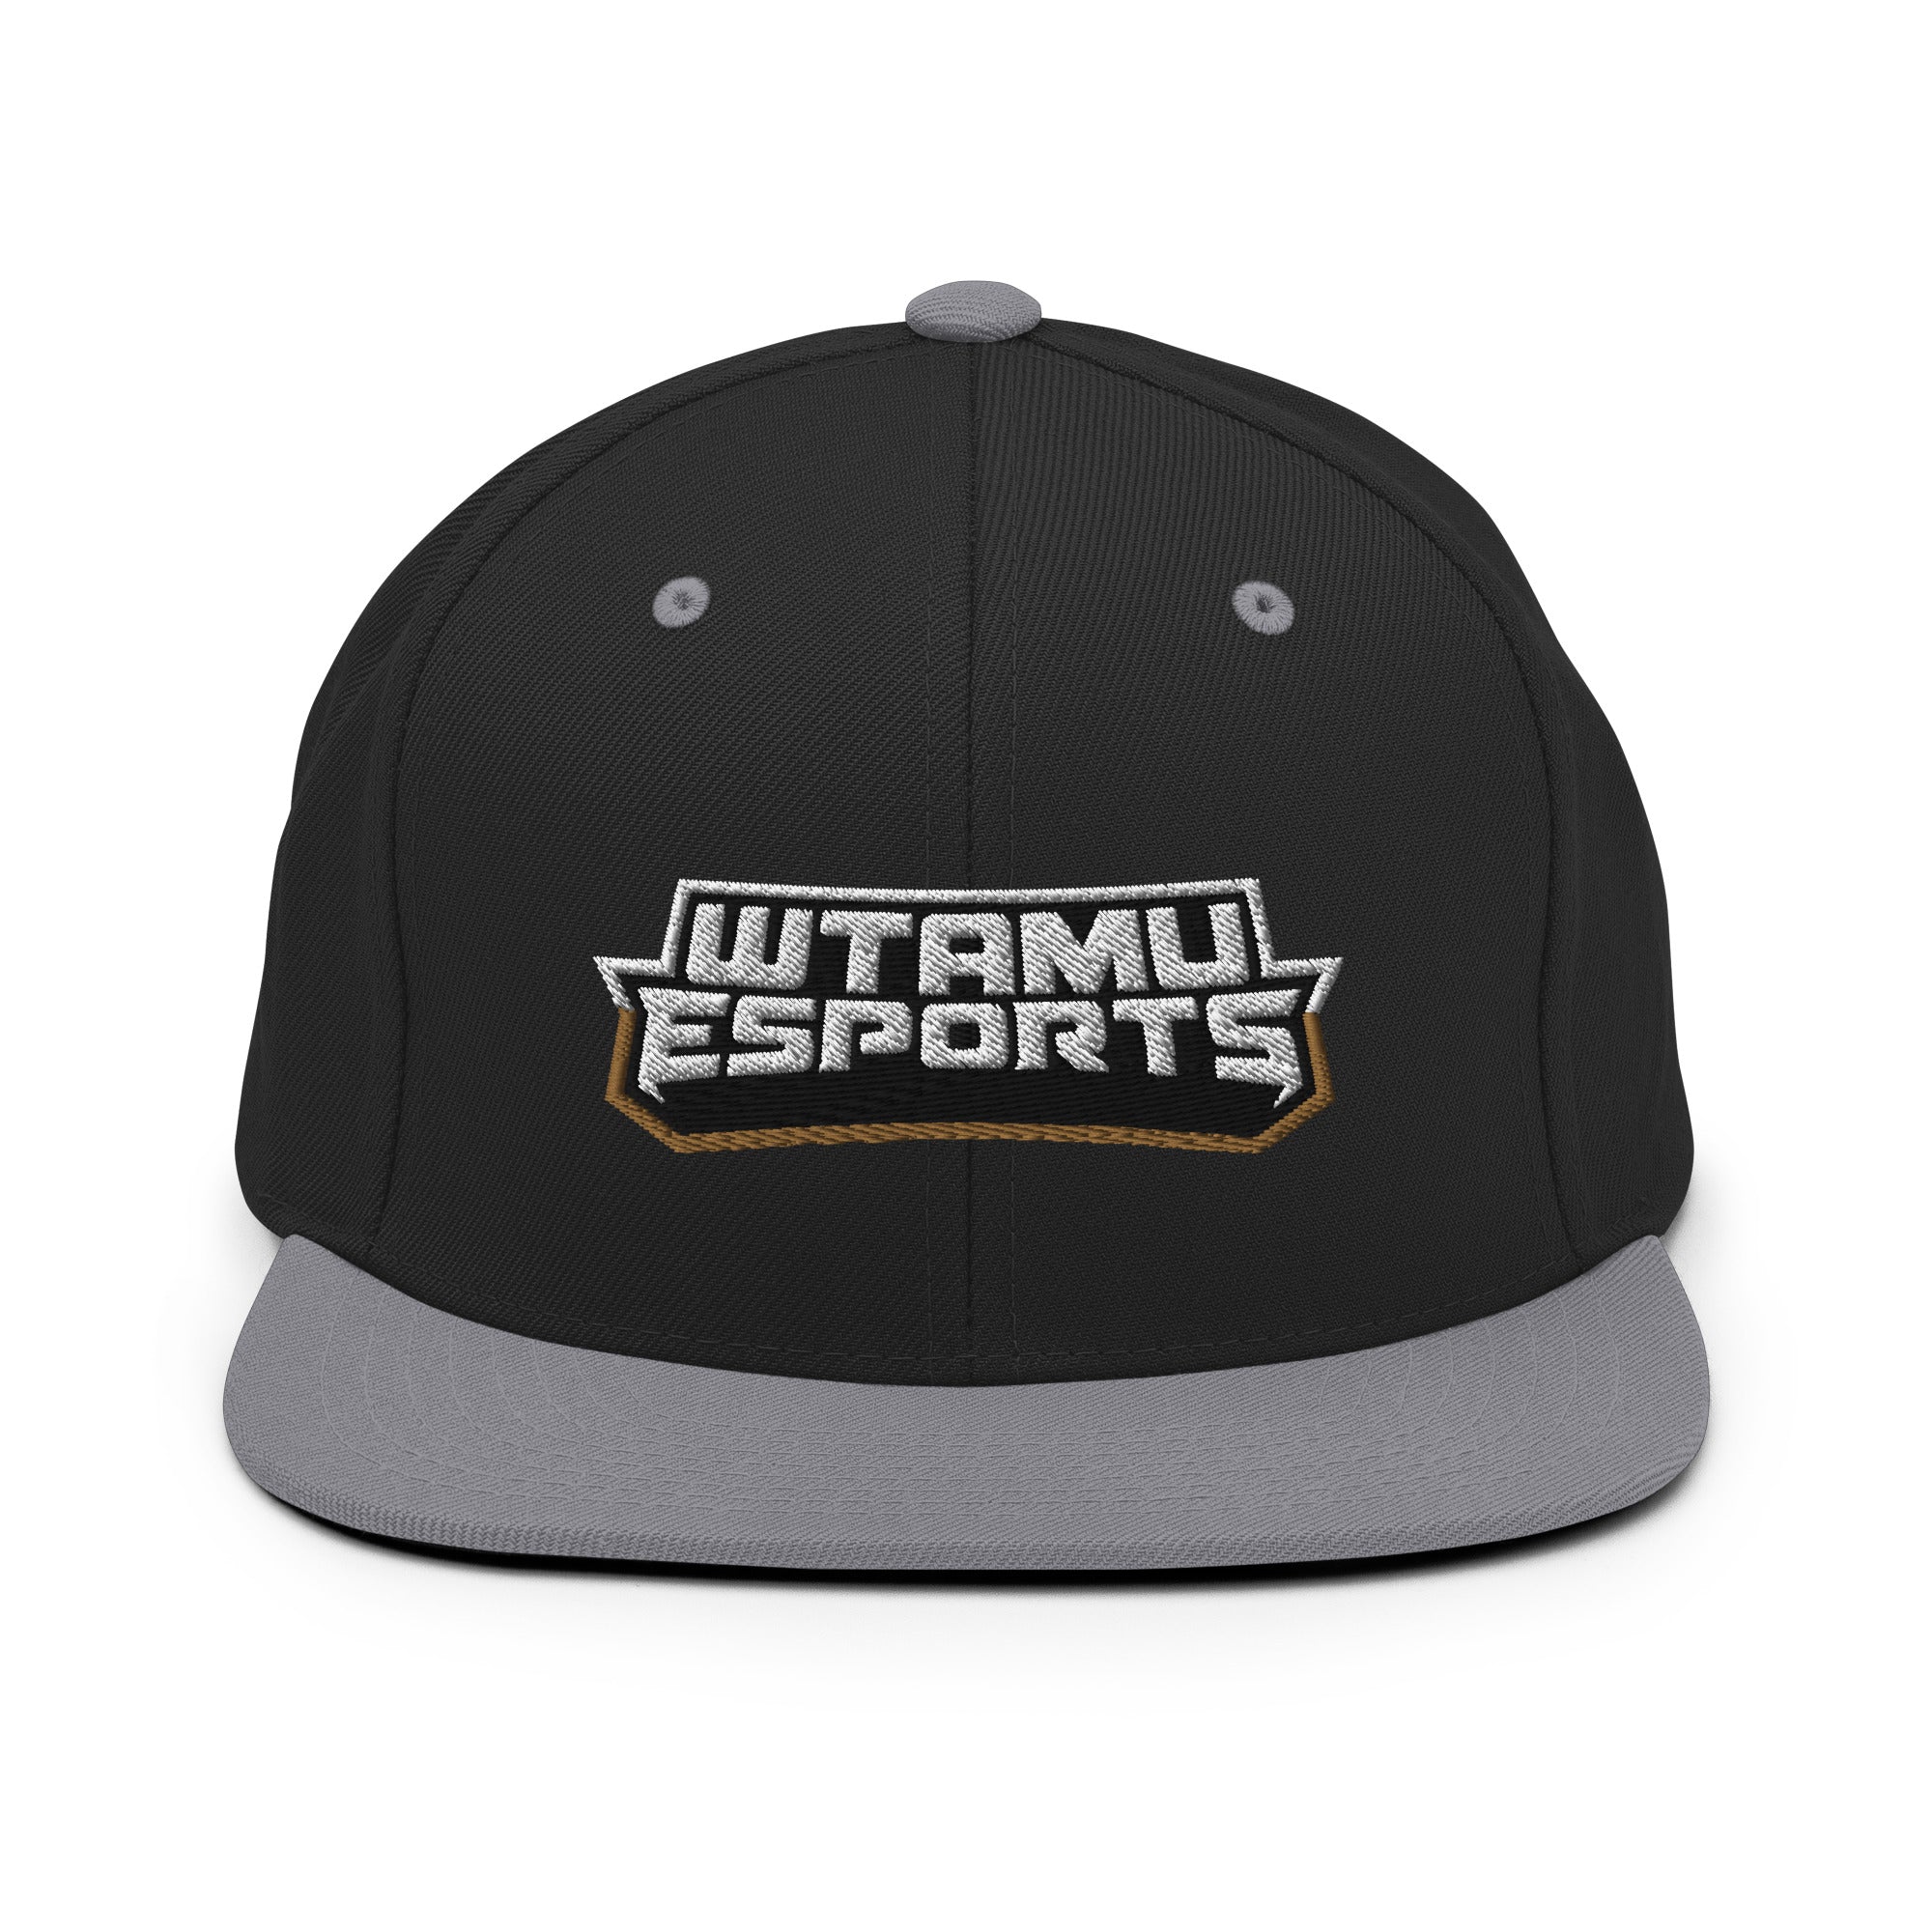 West Texas AM University | On Demand | Embroidered Snapback Hat